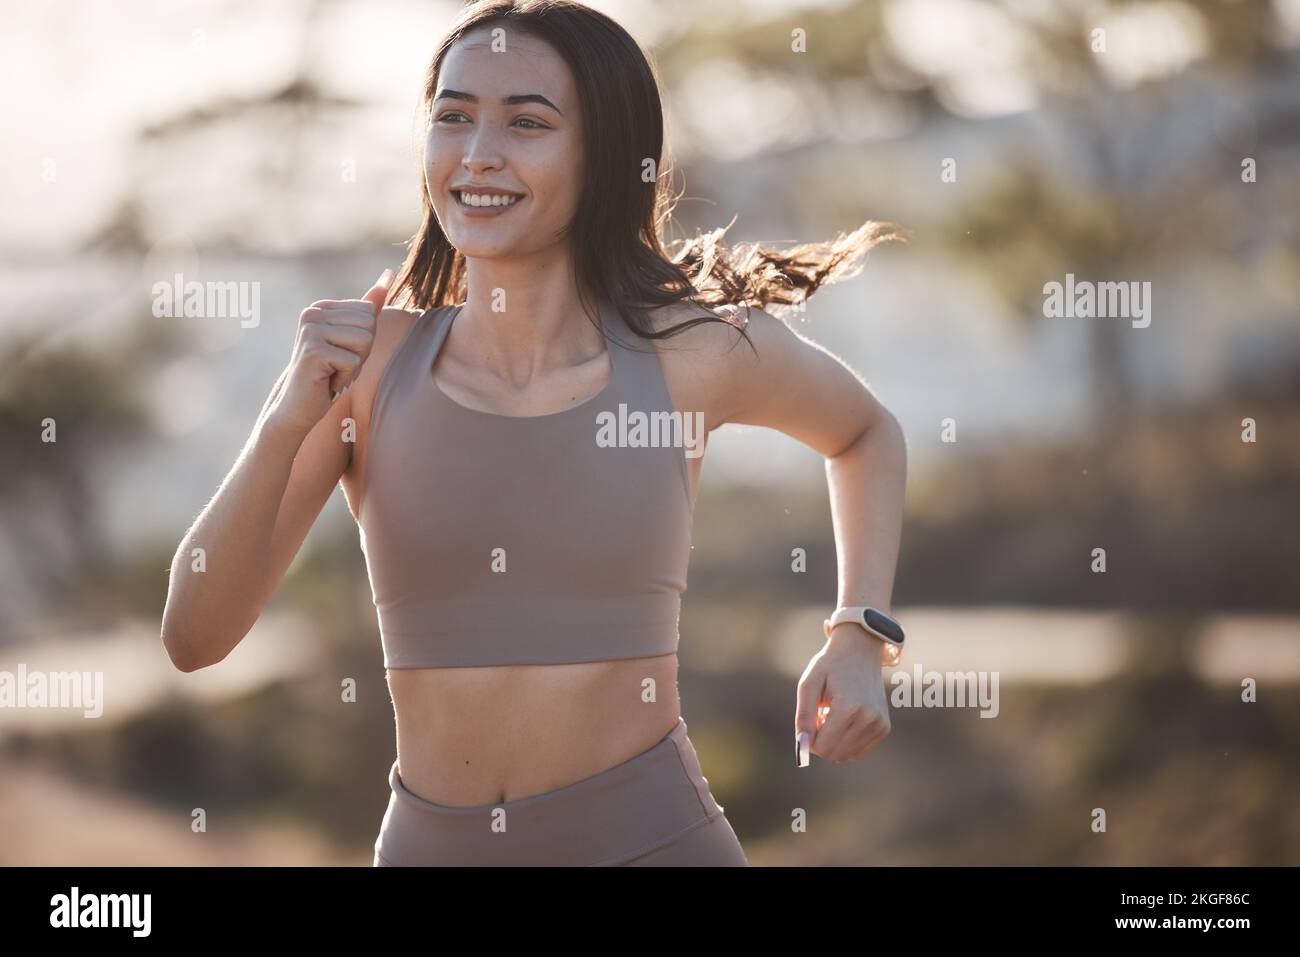 Fitness, motivation or woman running on road or street training, exercise or wellness workout on mountain or nature. Health, sports or happy runner Stock Photo